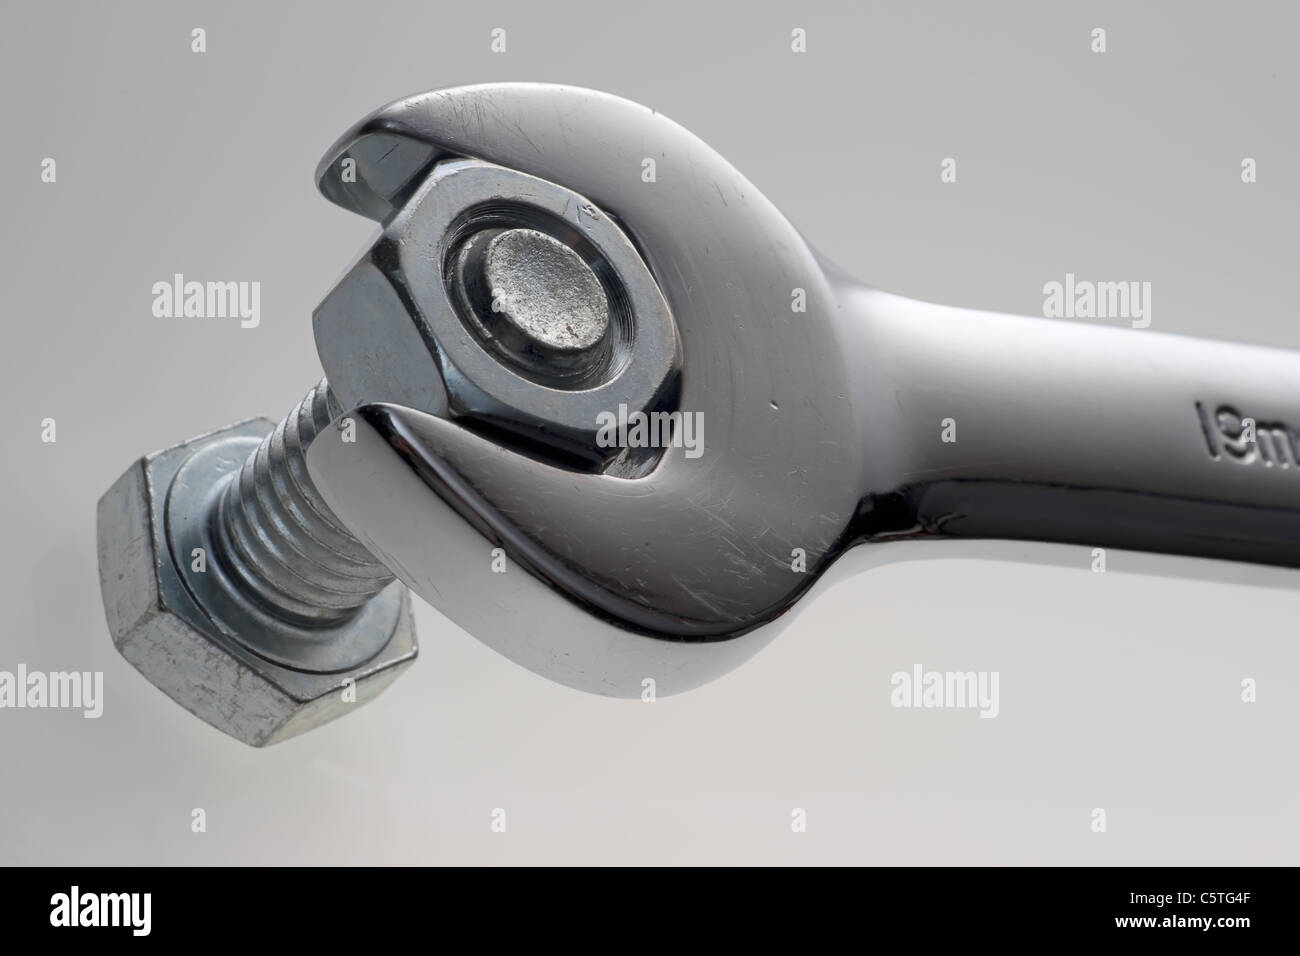 Extreme close up of a wrench, nut, and bolt Stock Photo